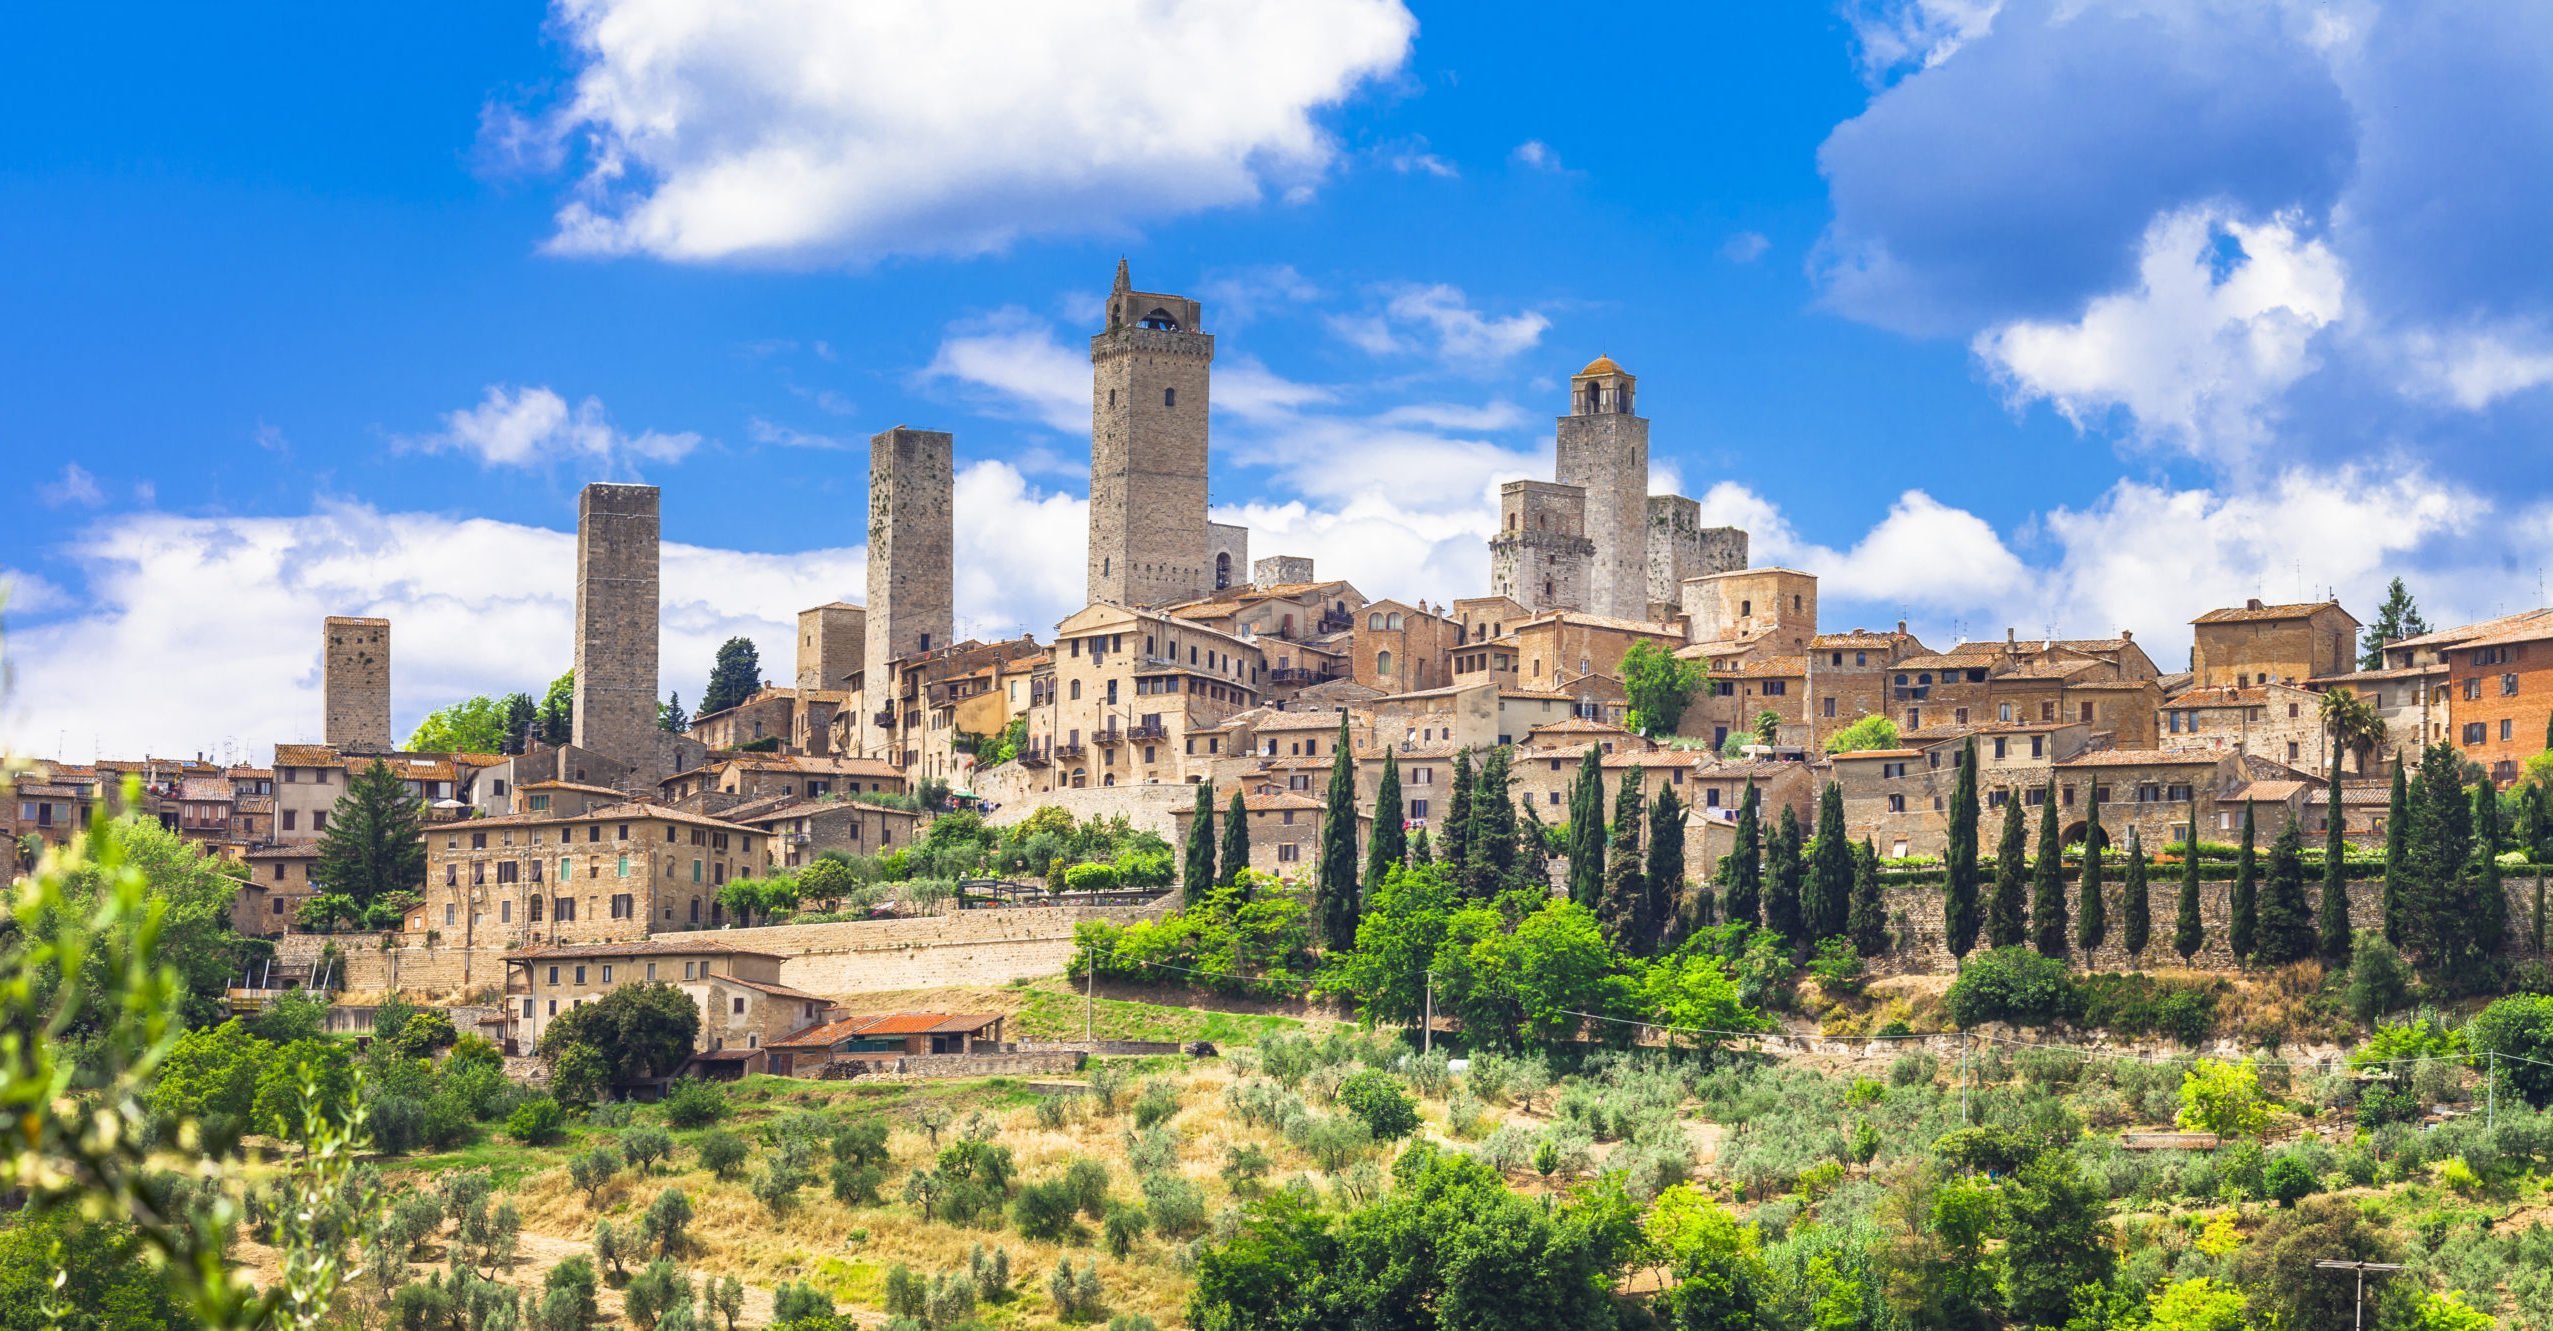 Explore The Medieval Town Of San Gimignano During The Best Of Tuscany Tour